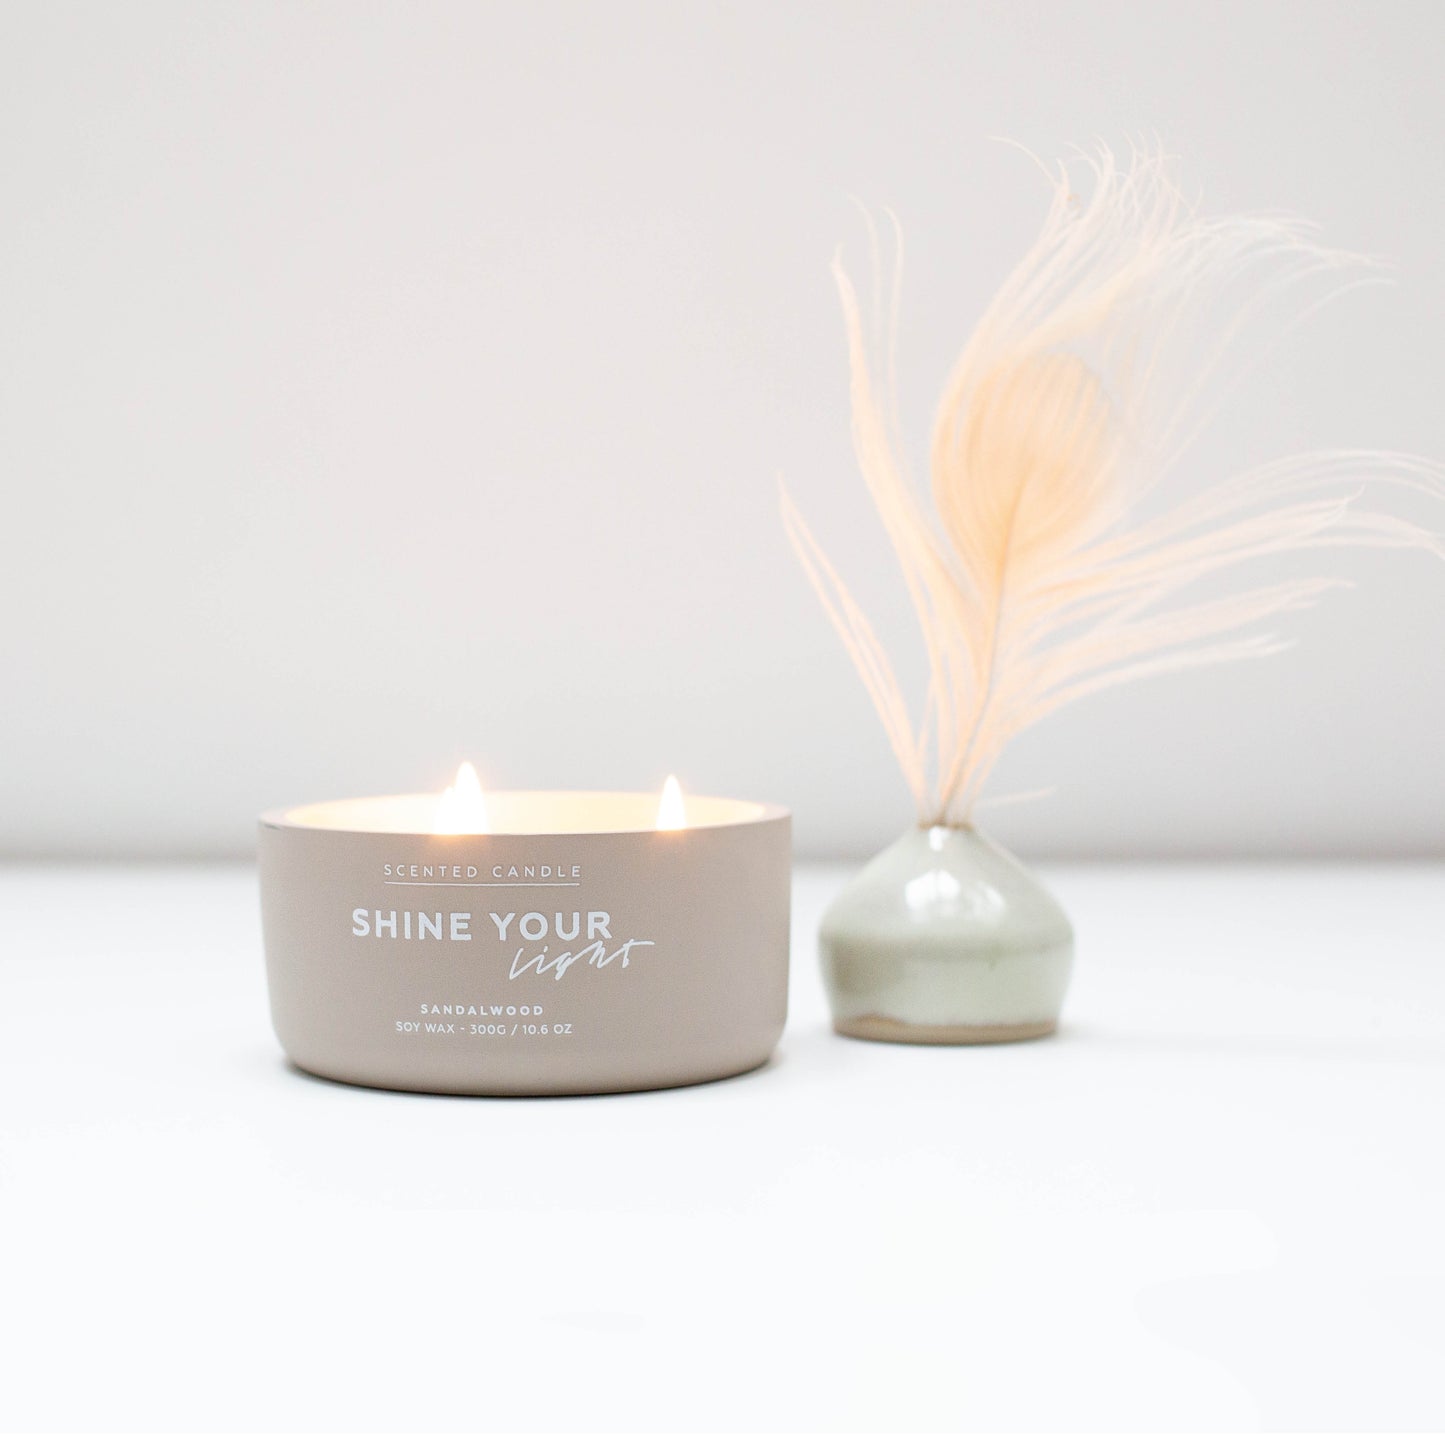 SHINE YOUR LIGHT - SCENTED CANDLE